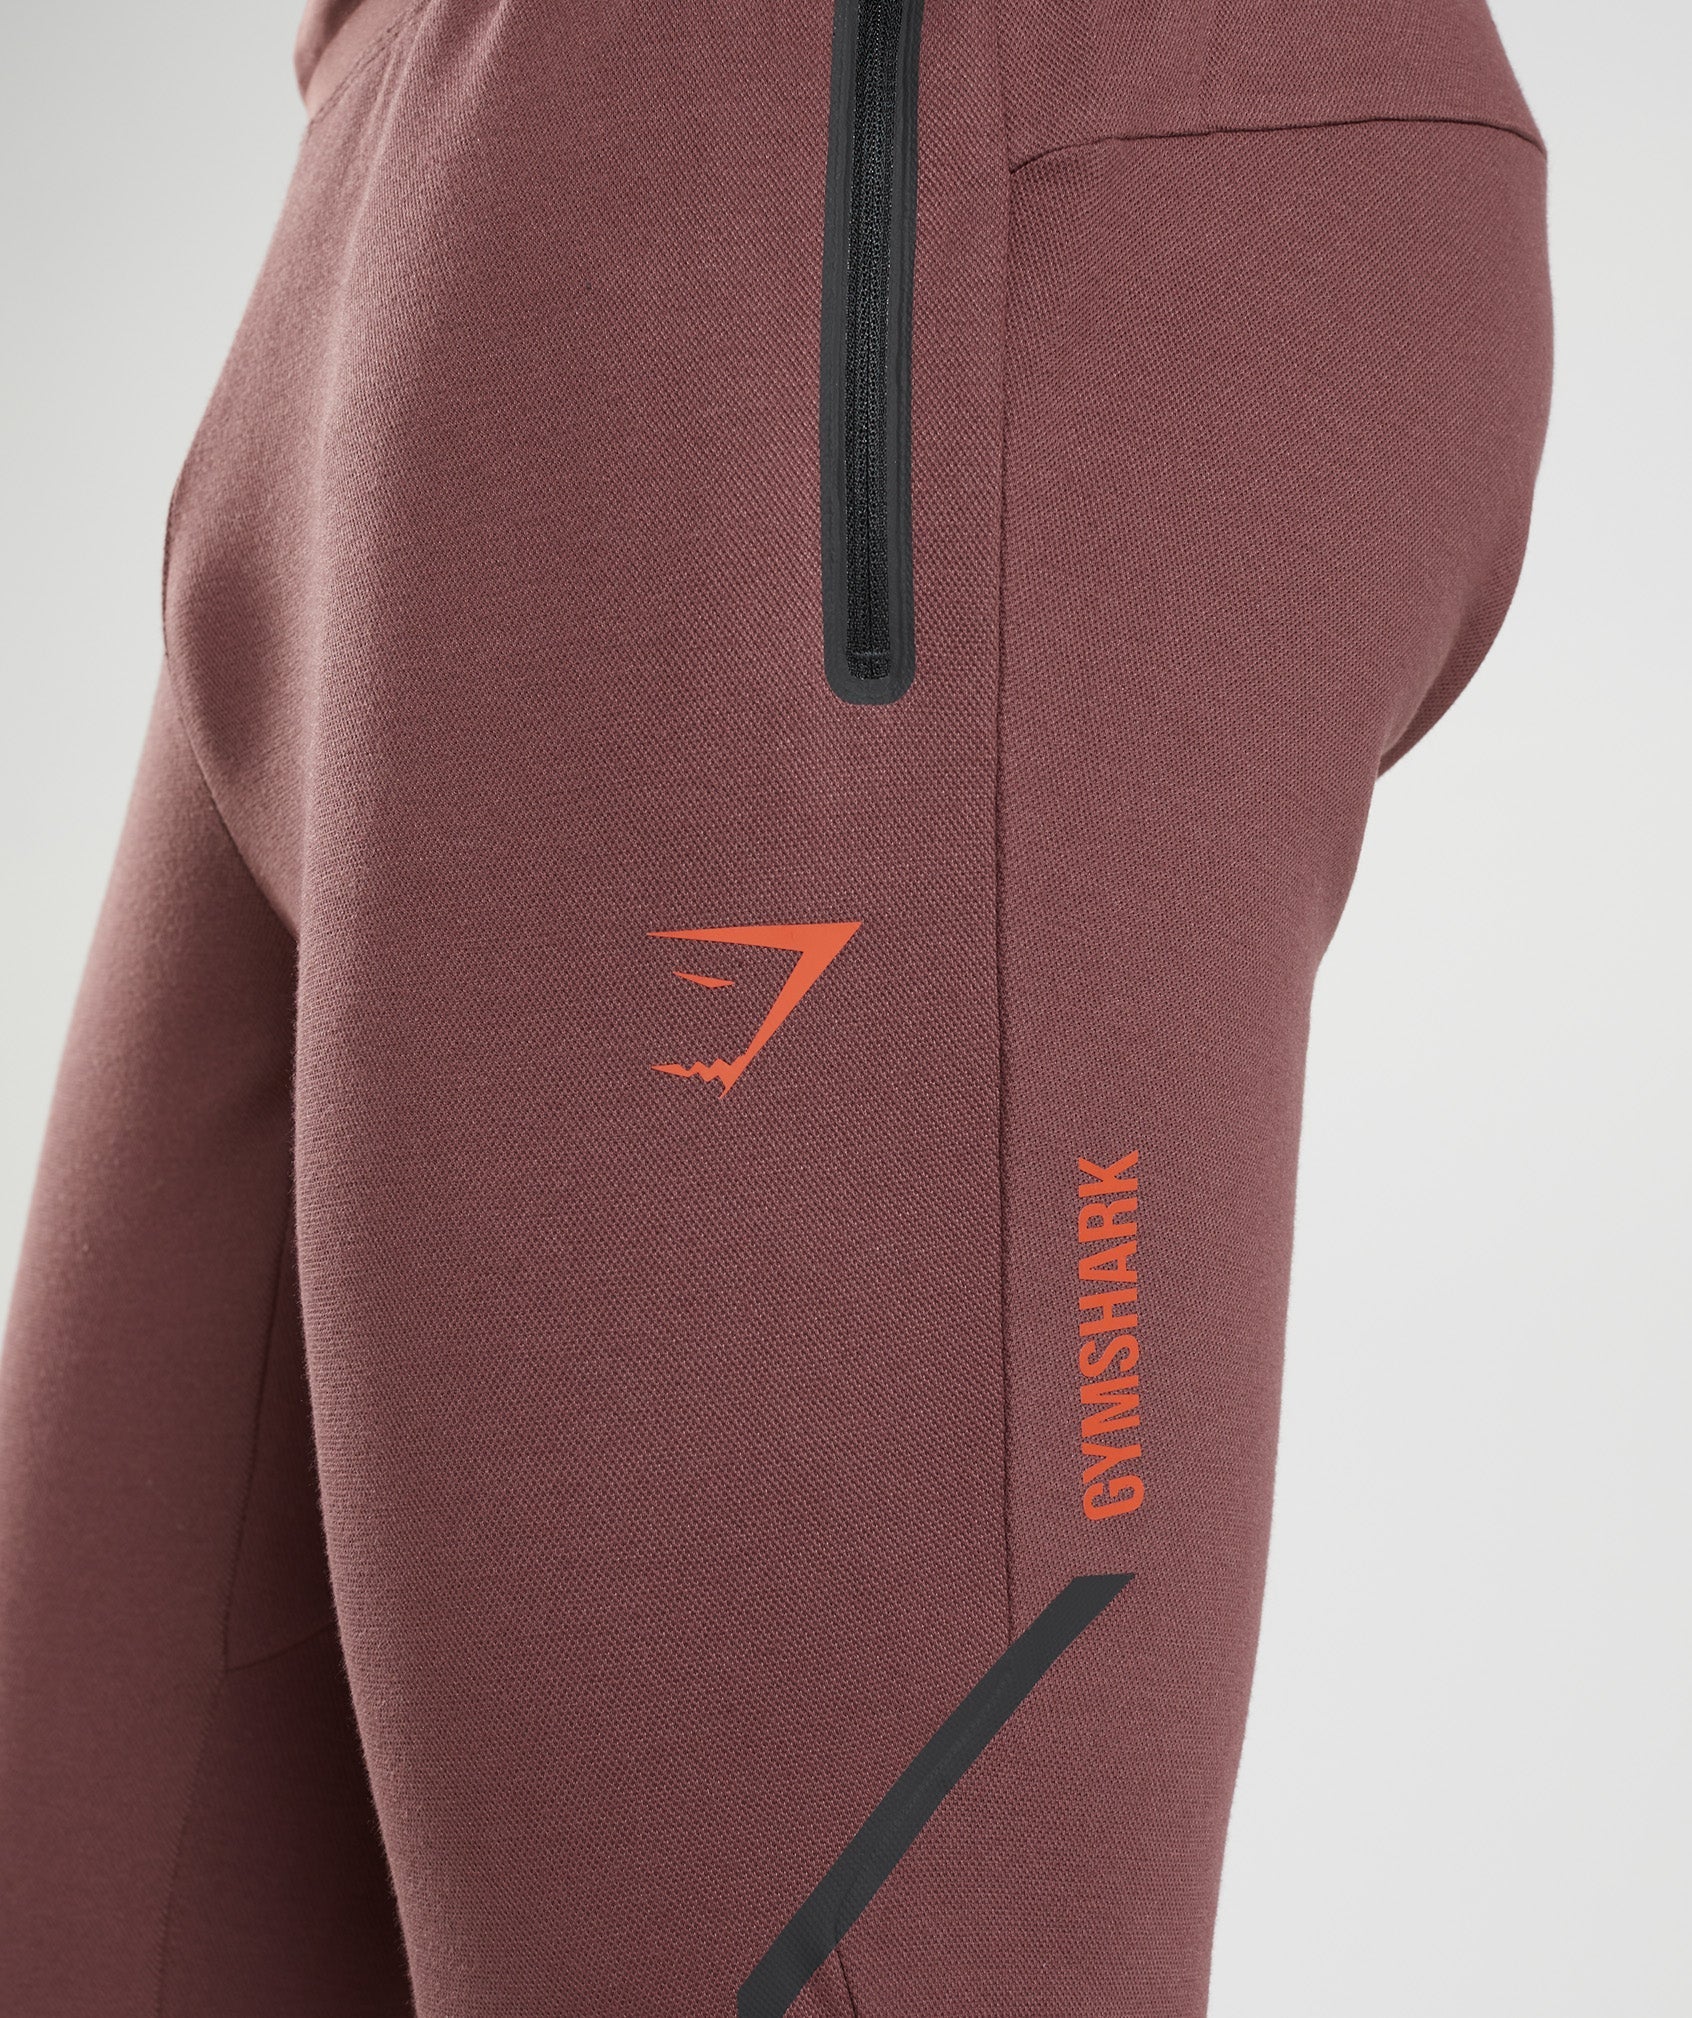 Apex Technical Joggers in Cherry Brown - view 5